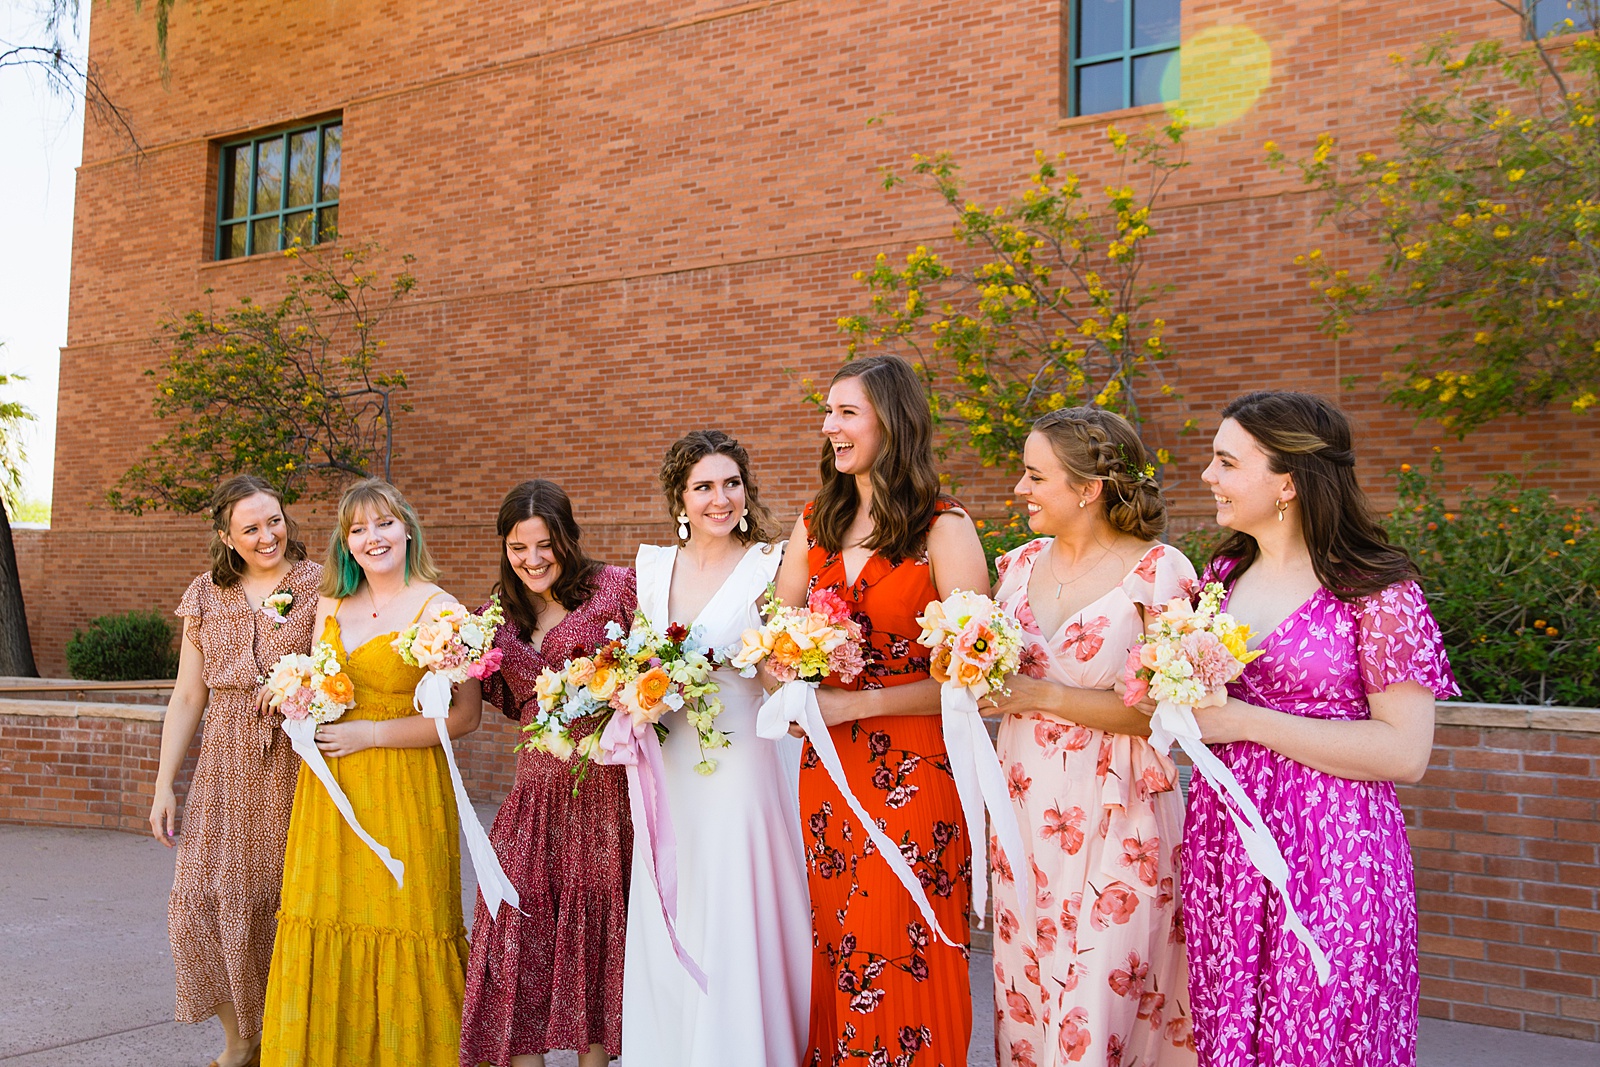 Bride and bridesmaids laughing together at Arizona Historical Society wedding by Tempe wedding photographer PMA Photography.